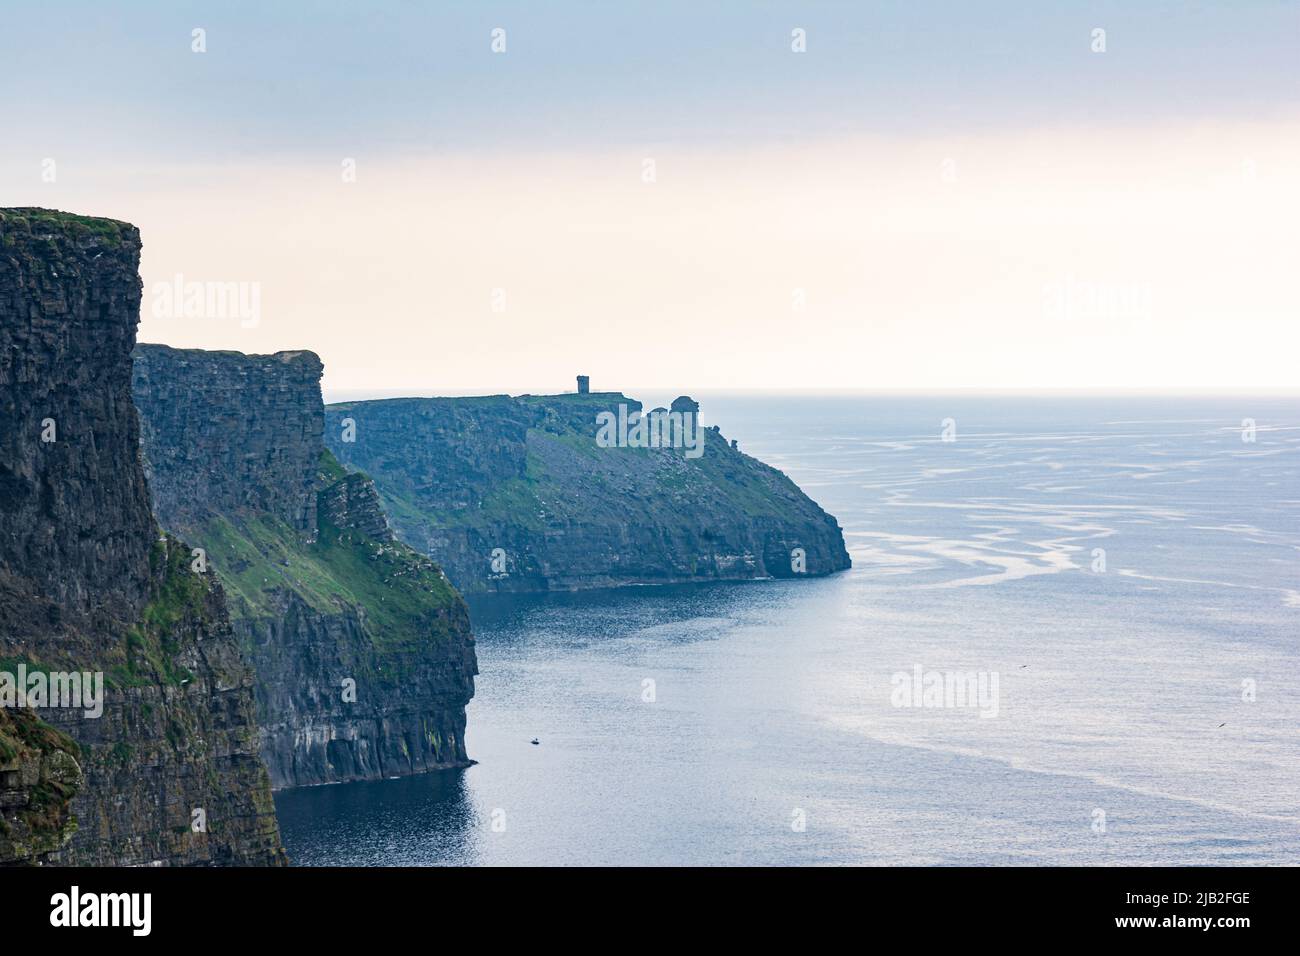 The famous Cliffs of Moher seen from the pathway, County Clare, Ireland Stock Photo